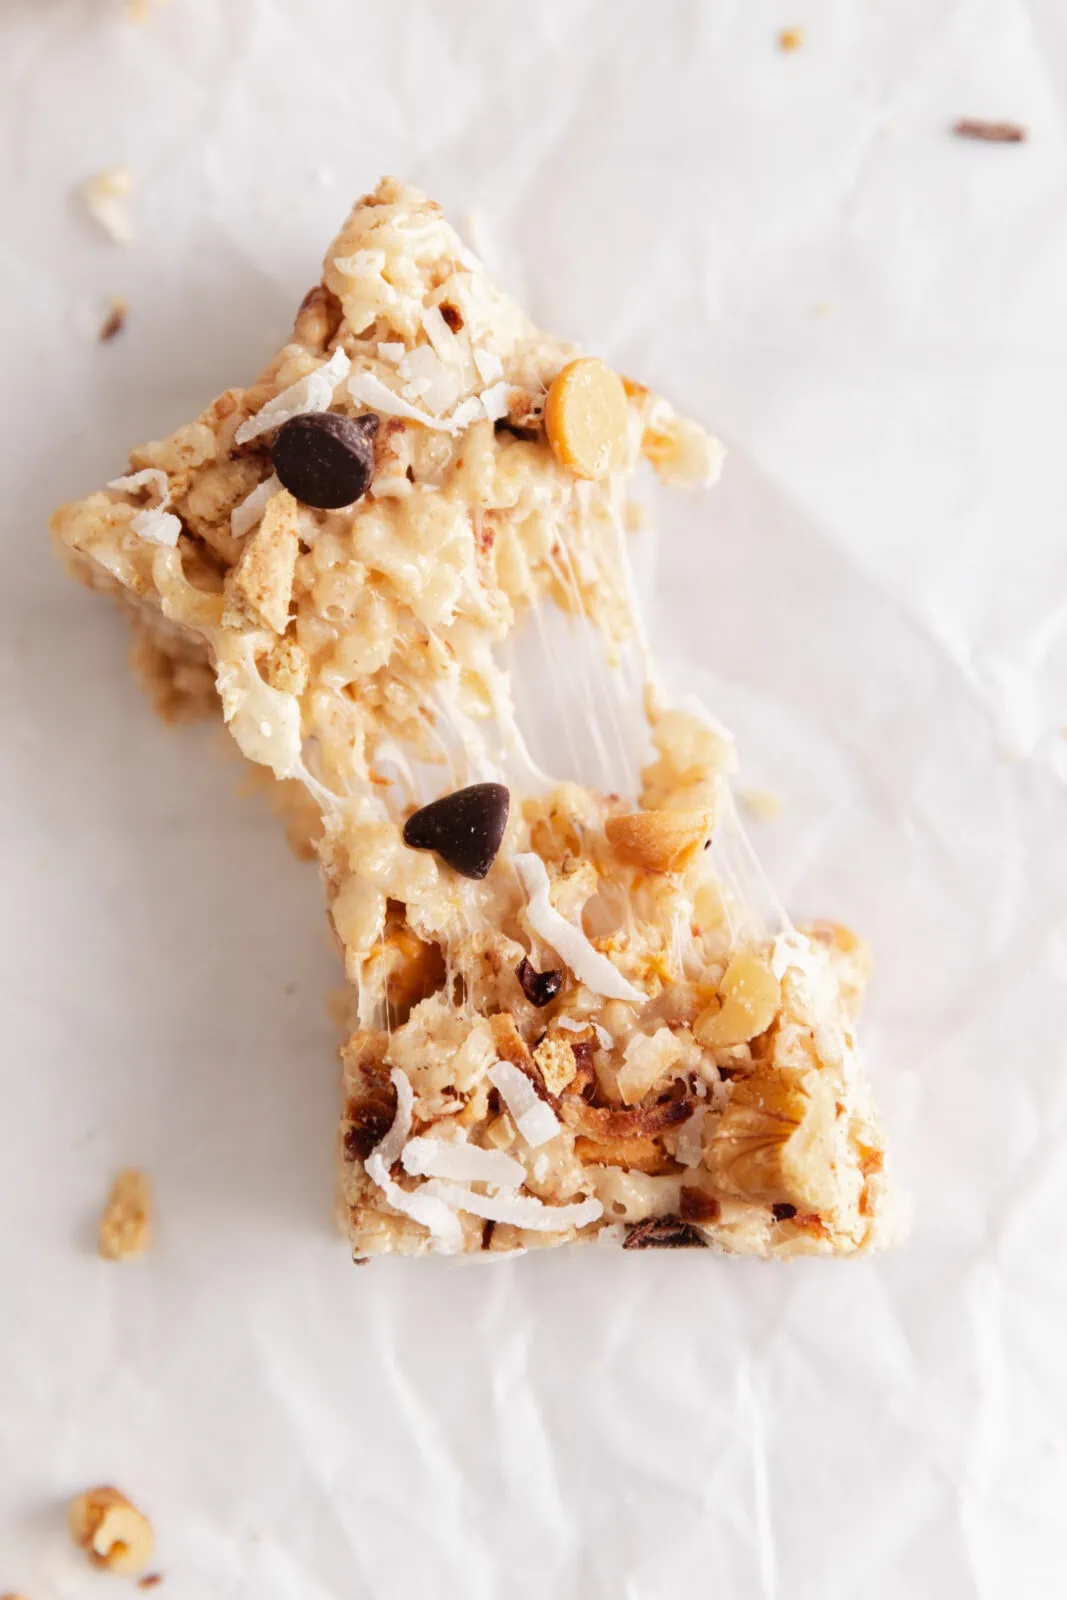 7 layer bar rice krispie treats with coconut, butterscotch, chocolate chips, and walnuts